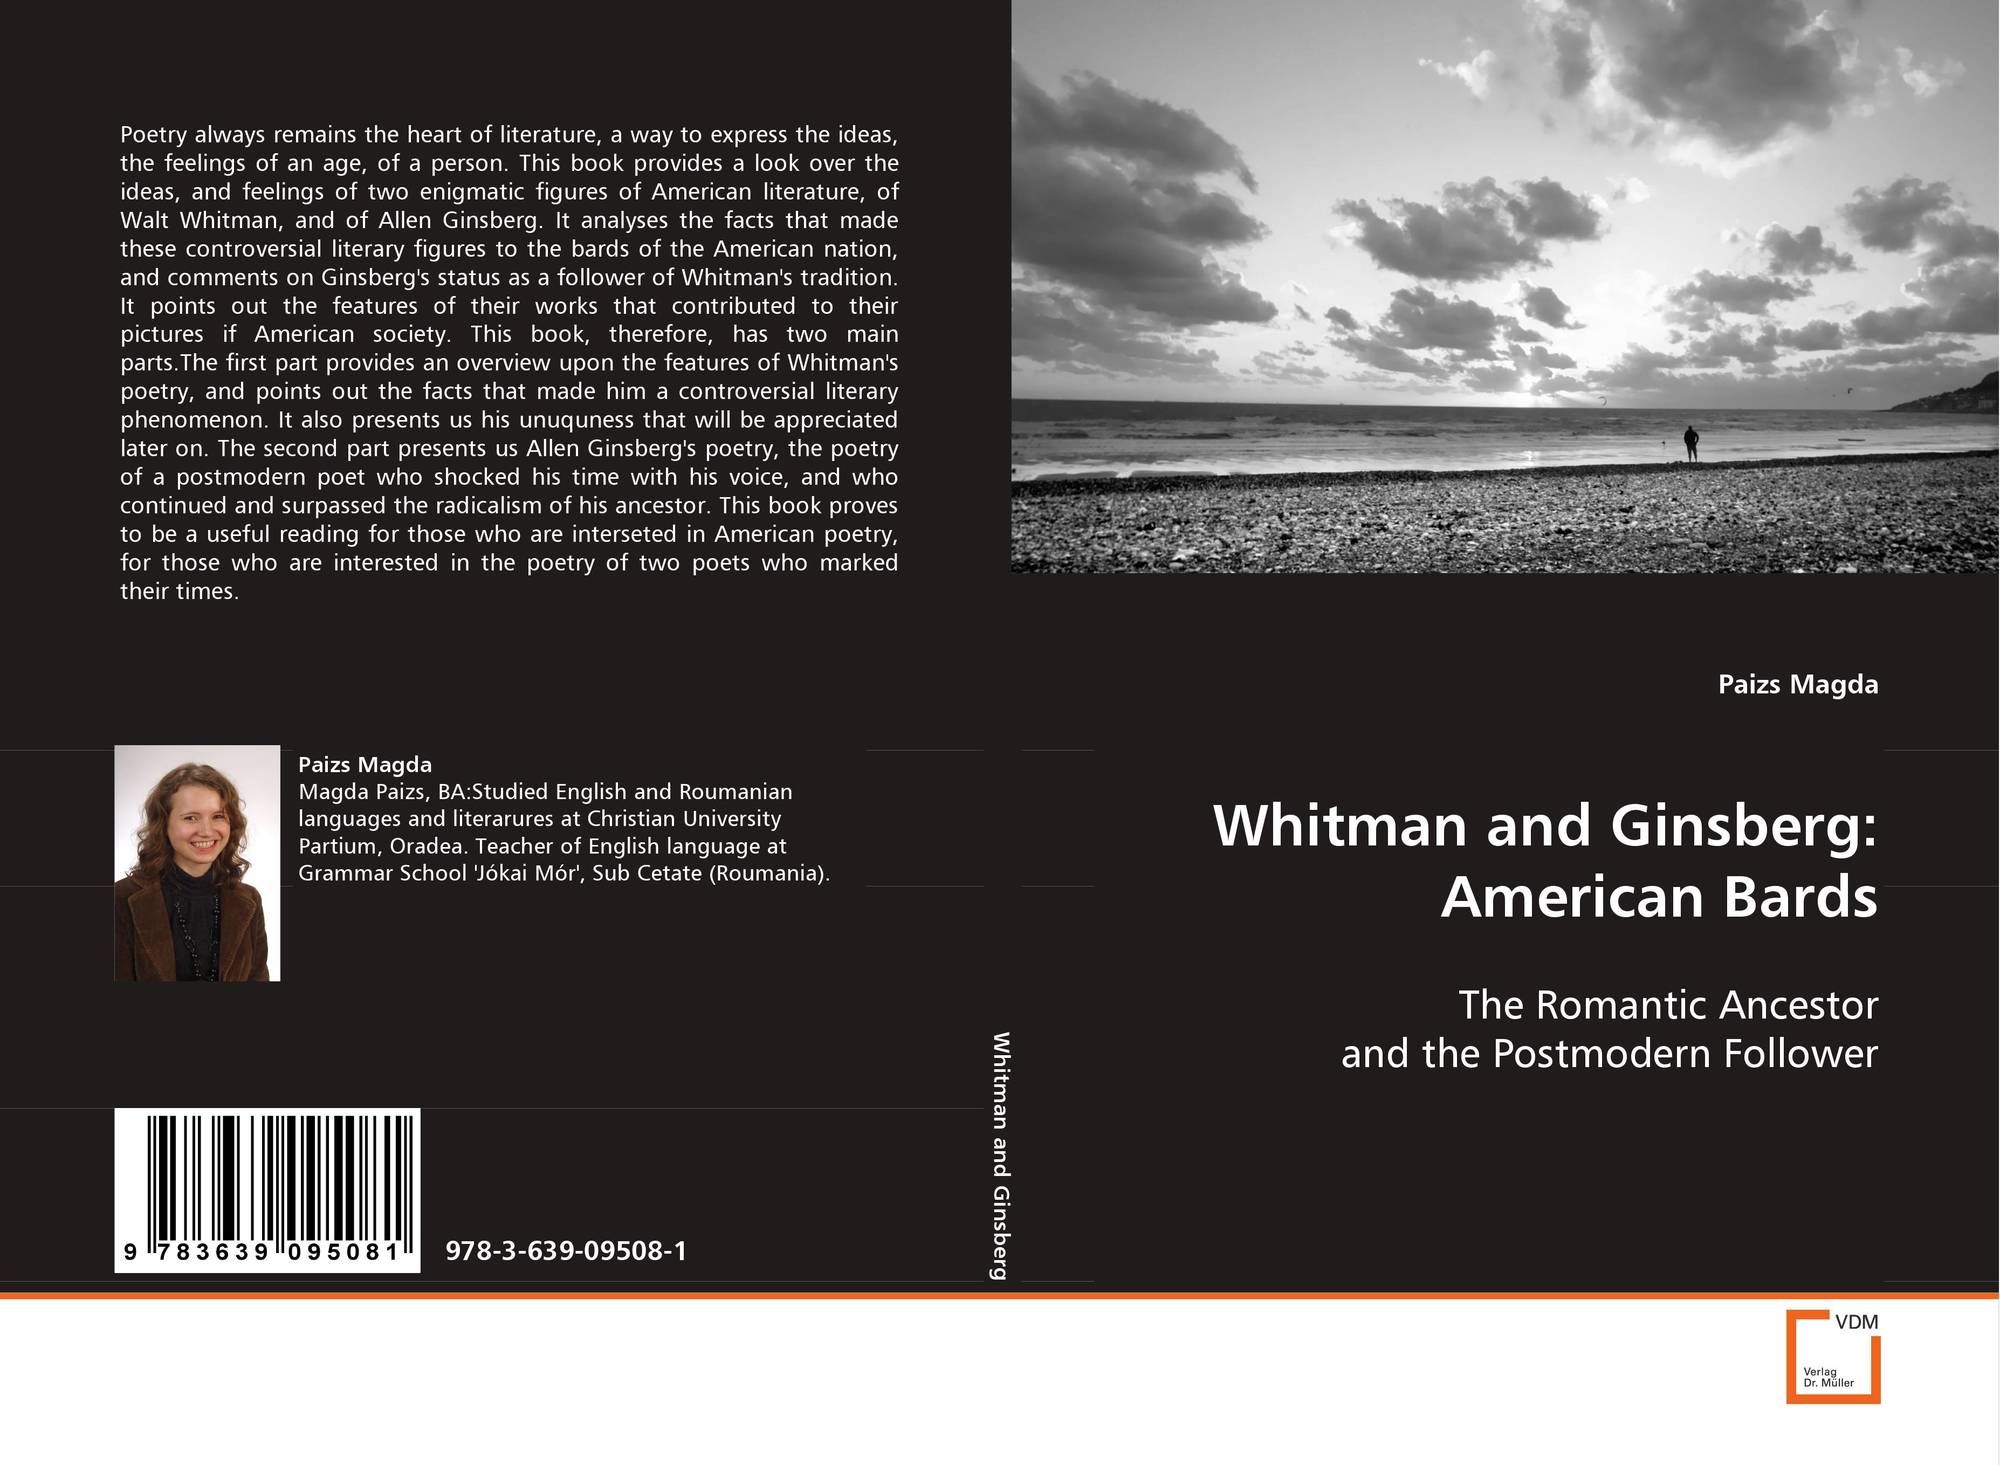 Compare And Contrast Walt Whitman And Ginsberg